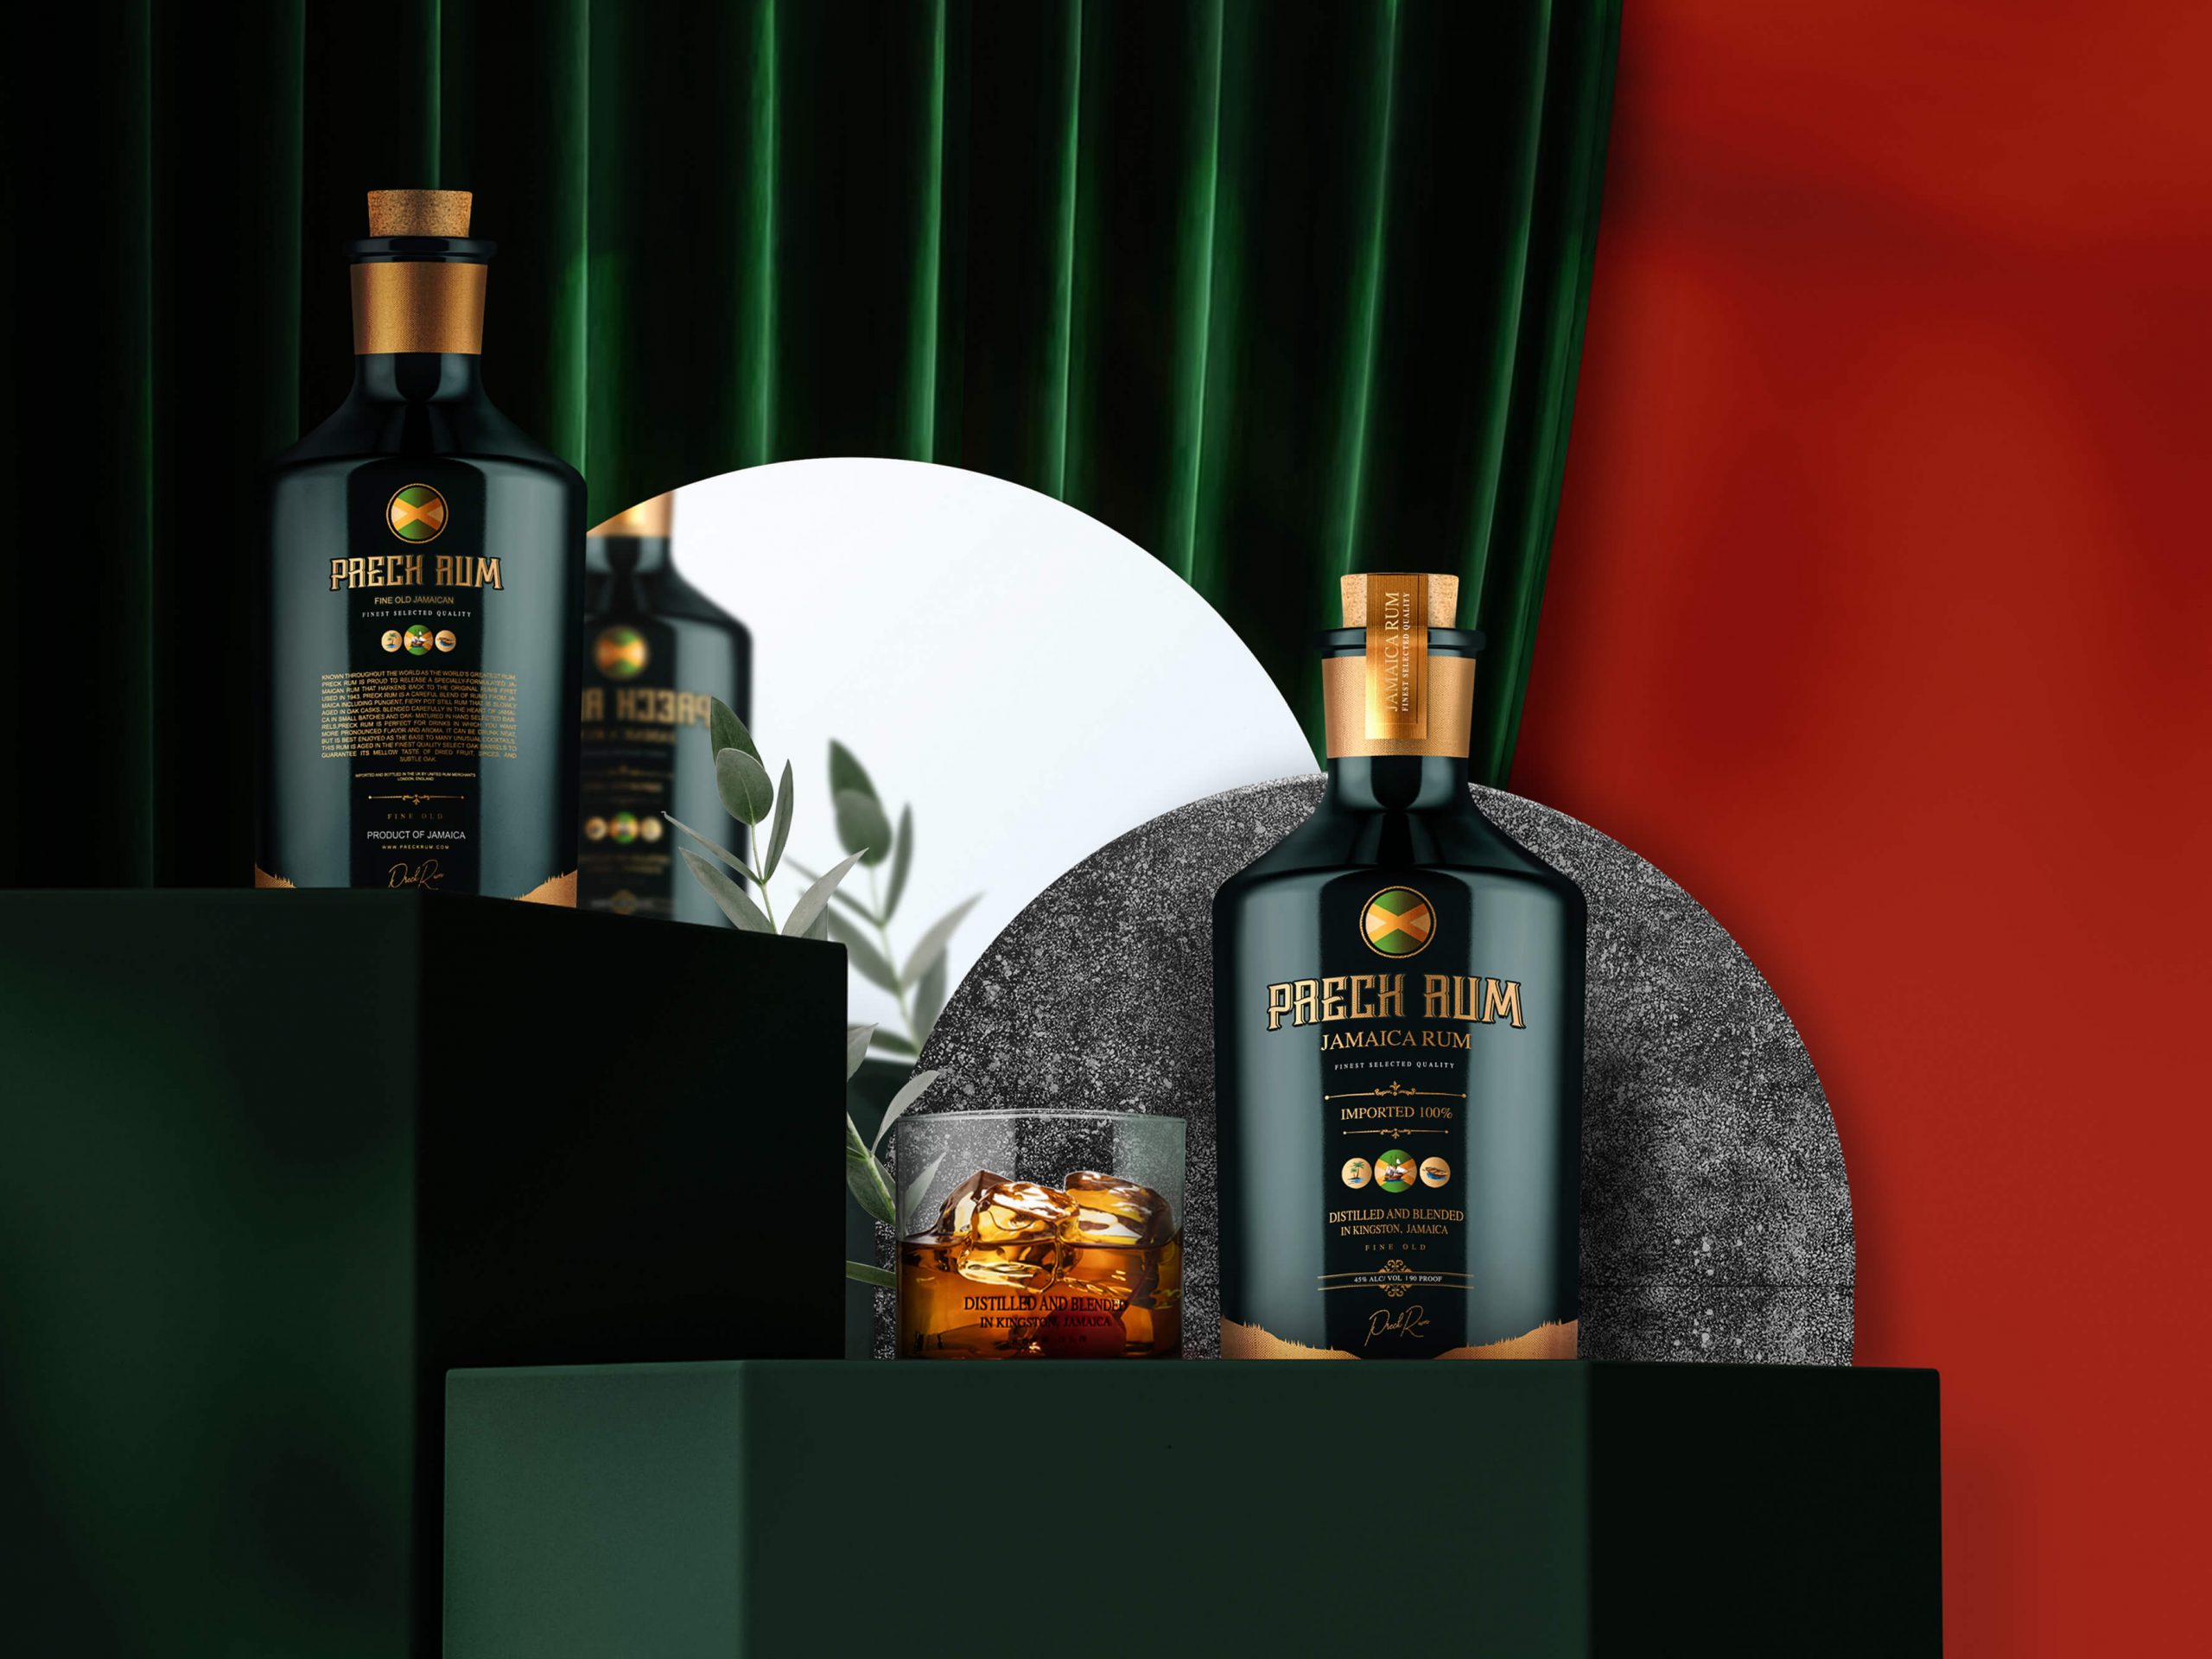 The packaging design for Preach Rum was carefully crafted to reflect the brand's Jamaican roots while also conveying a sense of sophistication and luxury. I chose to use a dark green color scheme combined with gold accents, which not only complement each other nicely but also give the design a regal and timeless feel. As Preach Rum is based in London, it was important to create a design that would appeal to a discerning audience. Additionally, I created two unique gift packages - one featuring only Preach Rum, and another that includes a cigar along with the Preach Rum. Both gift packages showcase the distinctive Preach Rum identity, making them ideal for anyone looking to indulge in a premium spirits experience. Overall, my packaging design for Preach Rum combines elegance and class to create a standout product that's sure to leave a lasting impression.<br />
